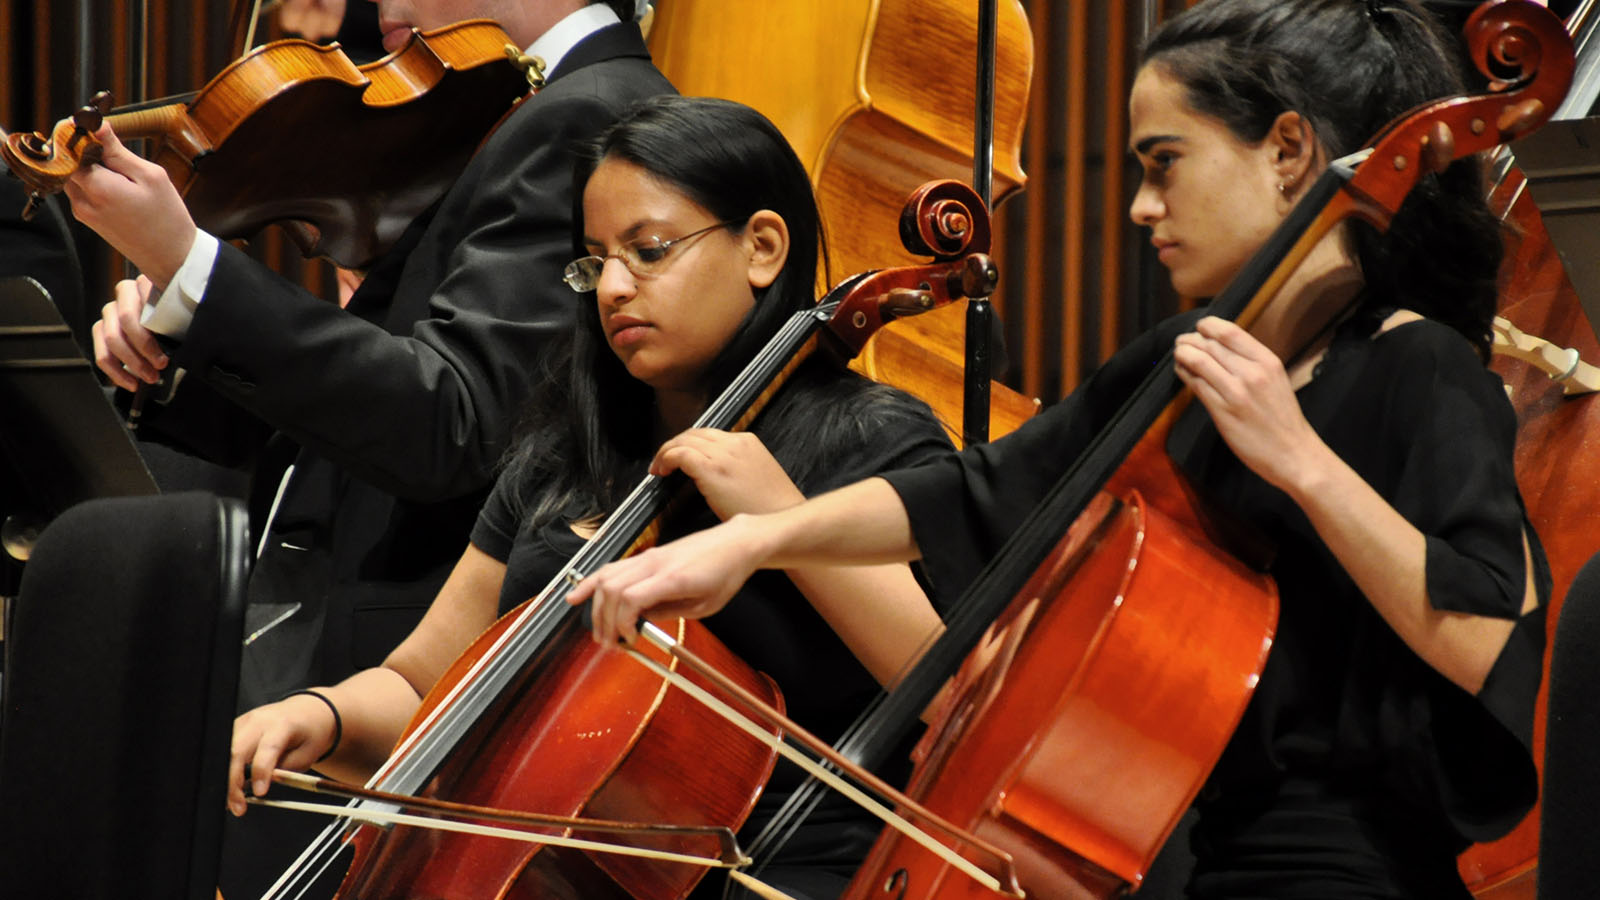 Cellists in the University of Maryland Repertoire Orchestra.